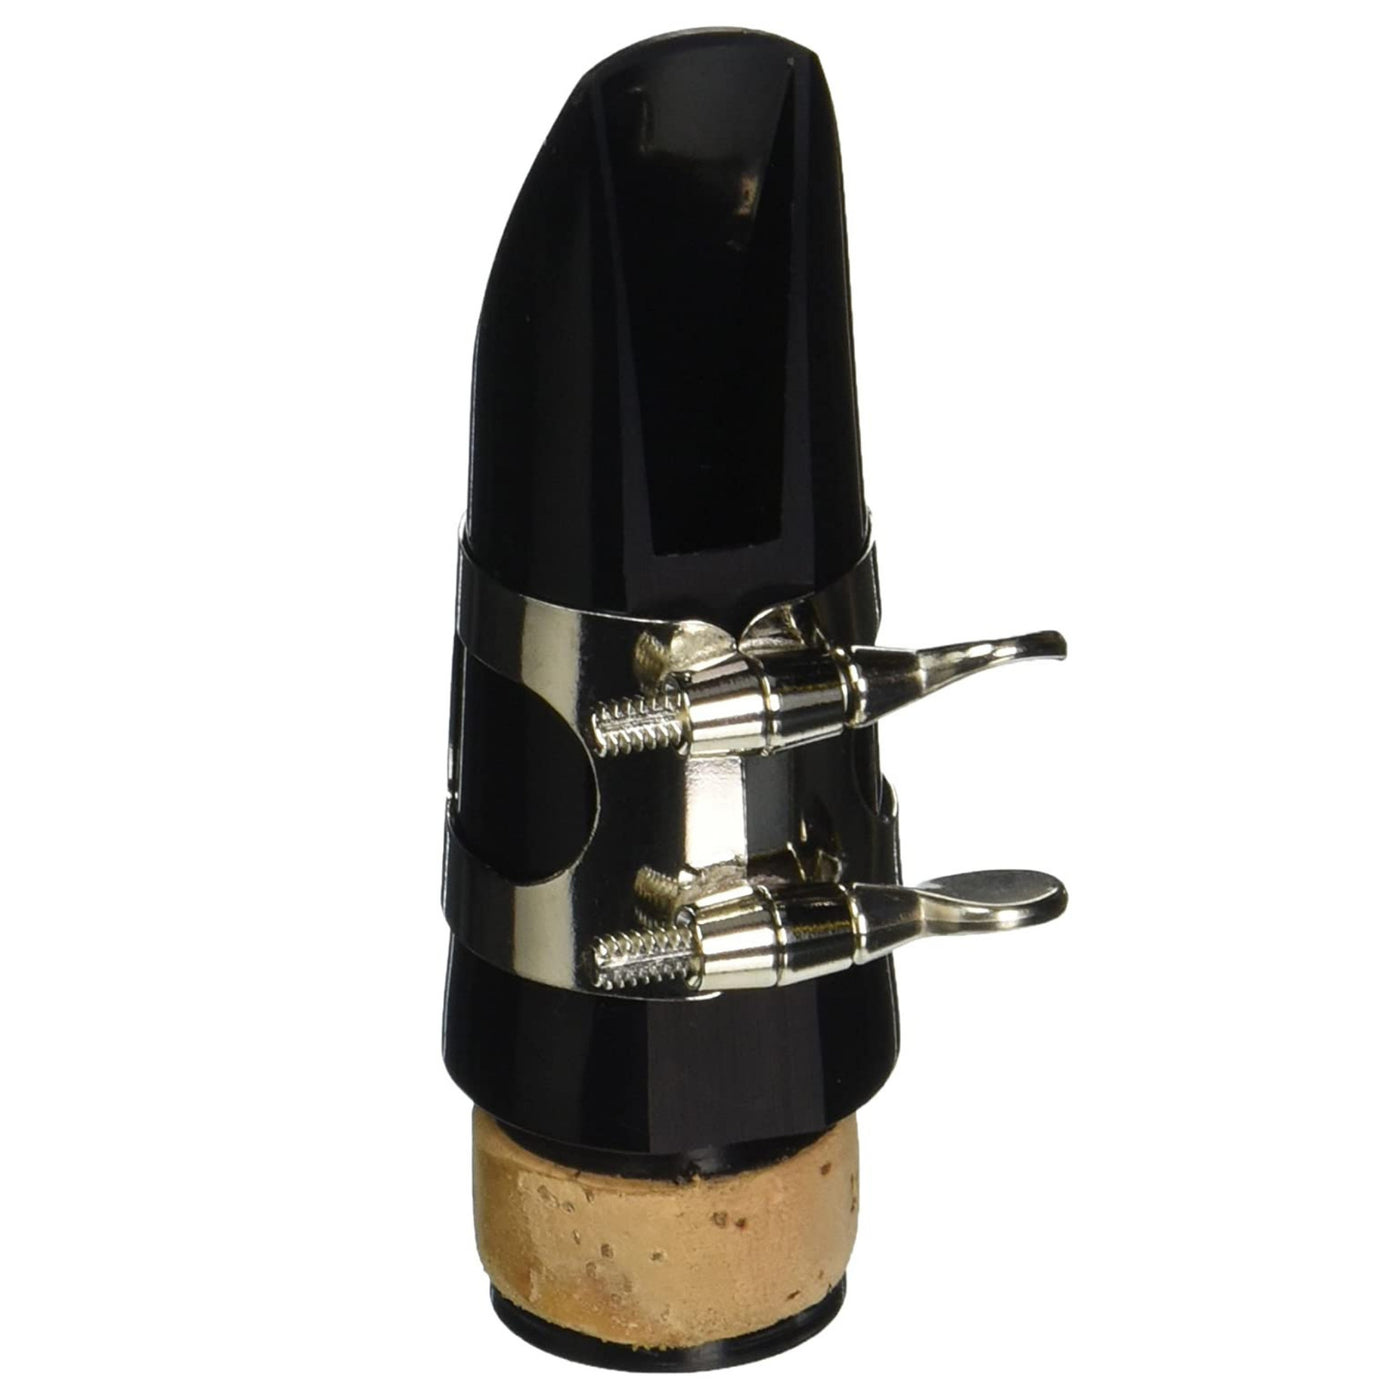 American Plating Clarinet Mouthpiece Kit